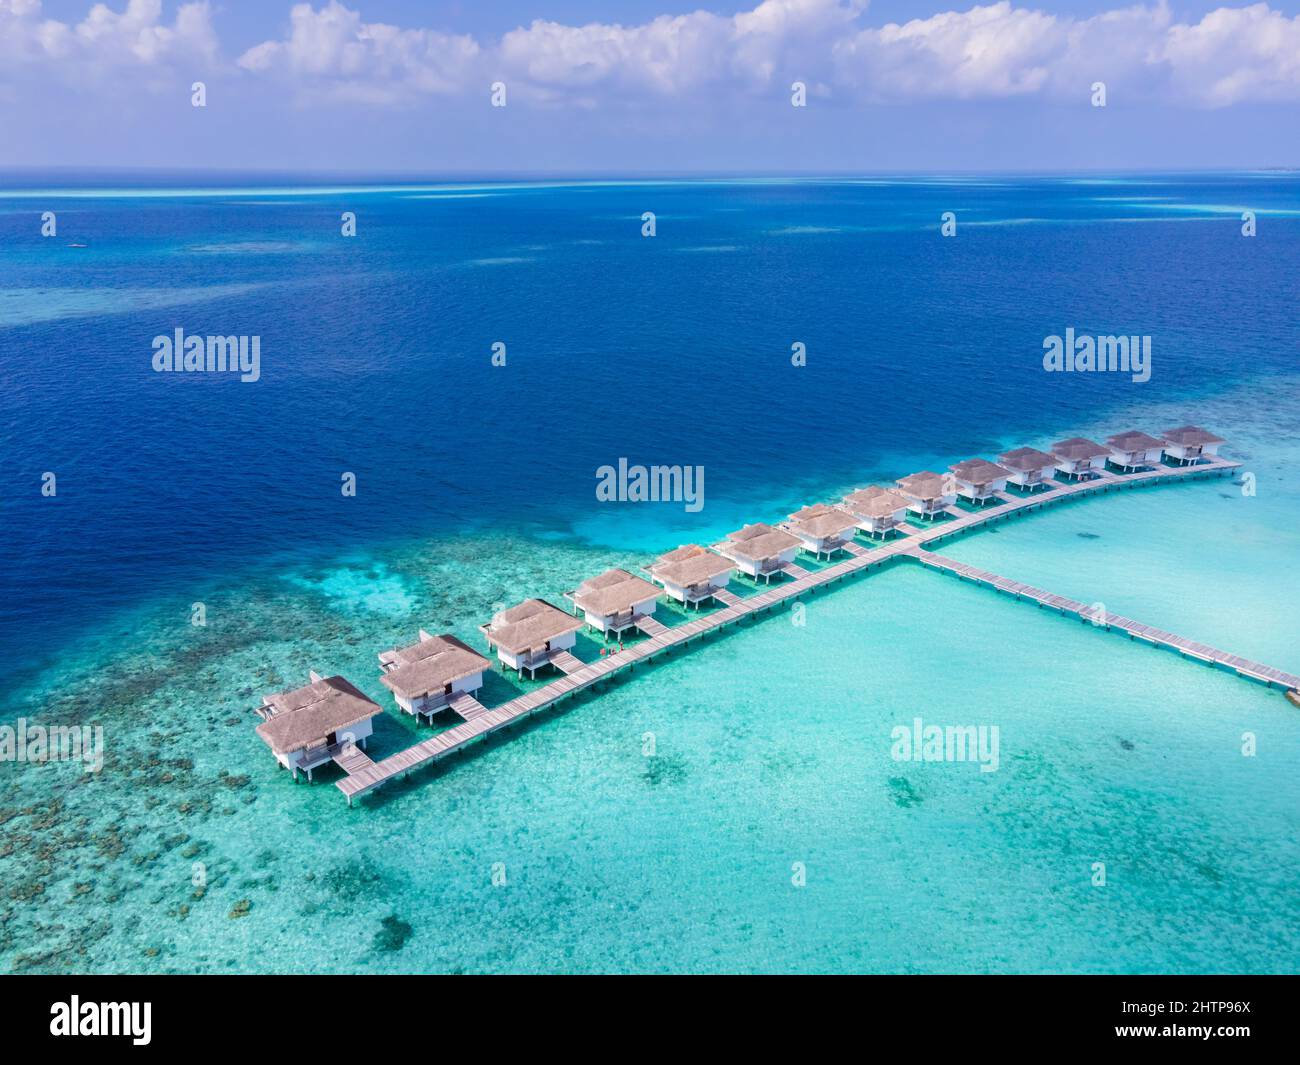 Luxury resort with overwater villas on tropical atoll island for beach holidays vacation travel and honeymoon. Luxurious hotel in Maldives or Caribbea Stock Photo